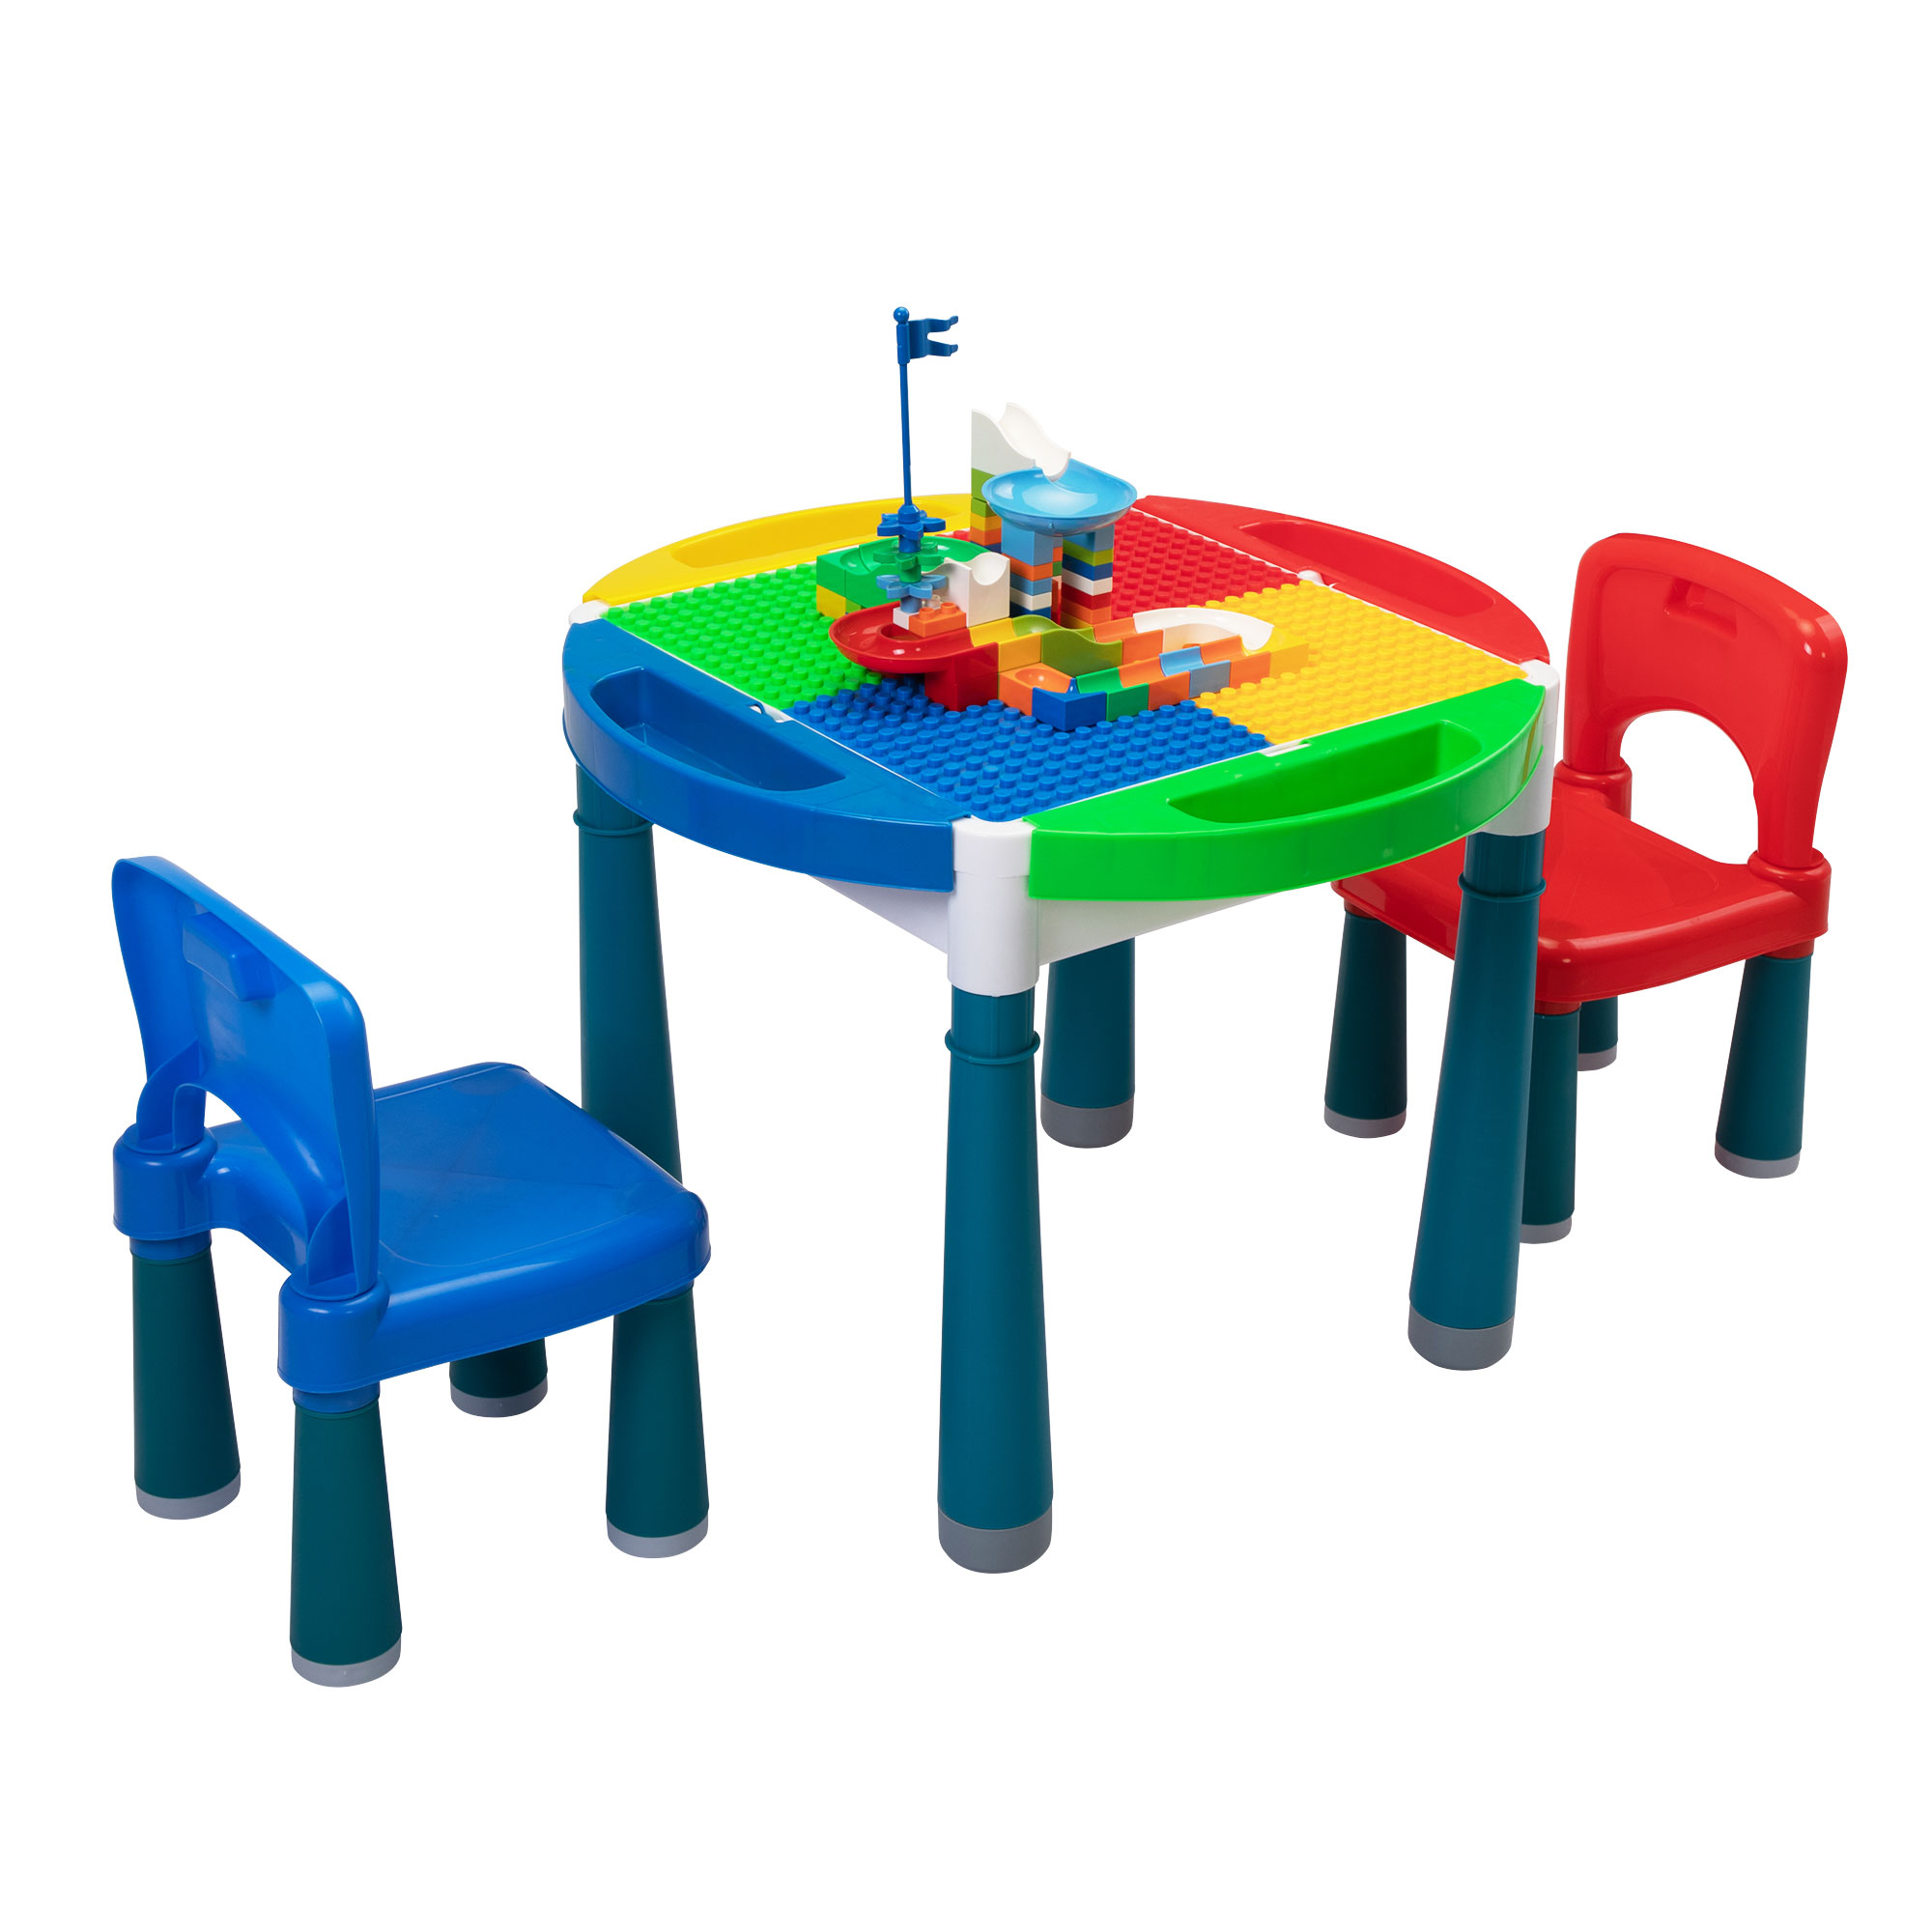 Kids Multi Activity Table  2 Chairs Set Building Blocks Toy Compatible Storage Table - red  yellow  blue  green-CASAINC